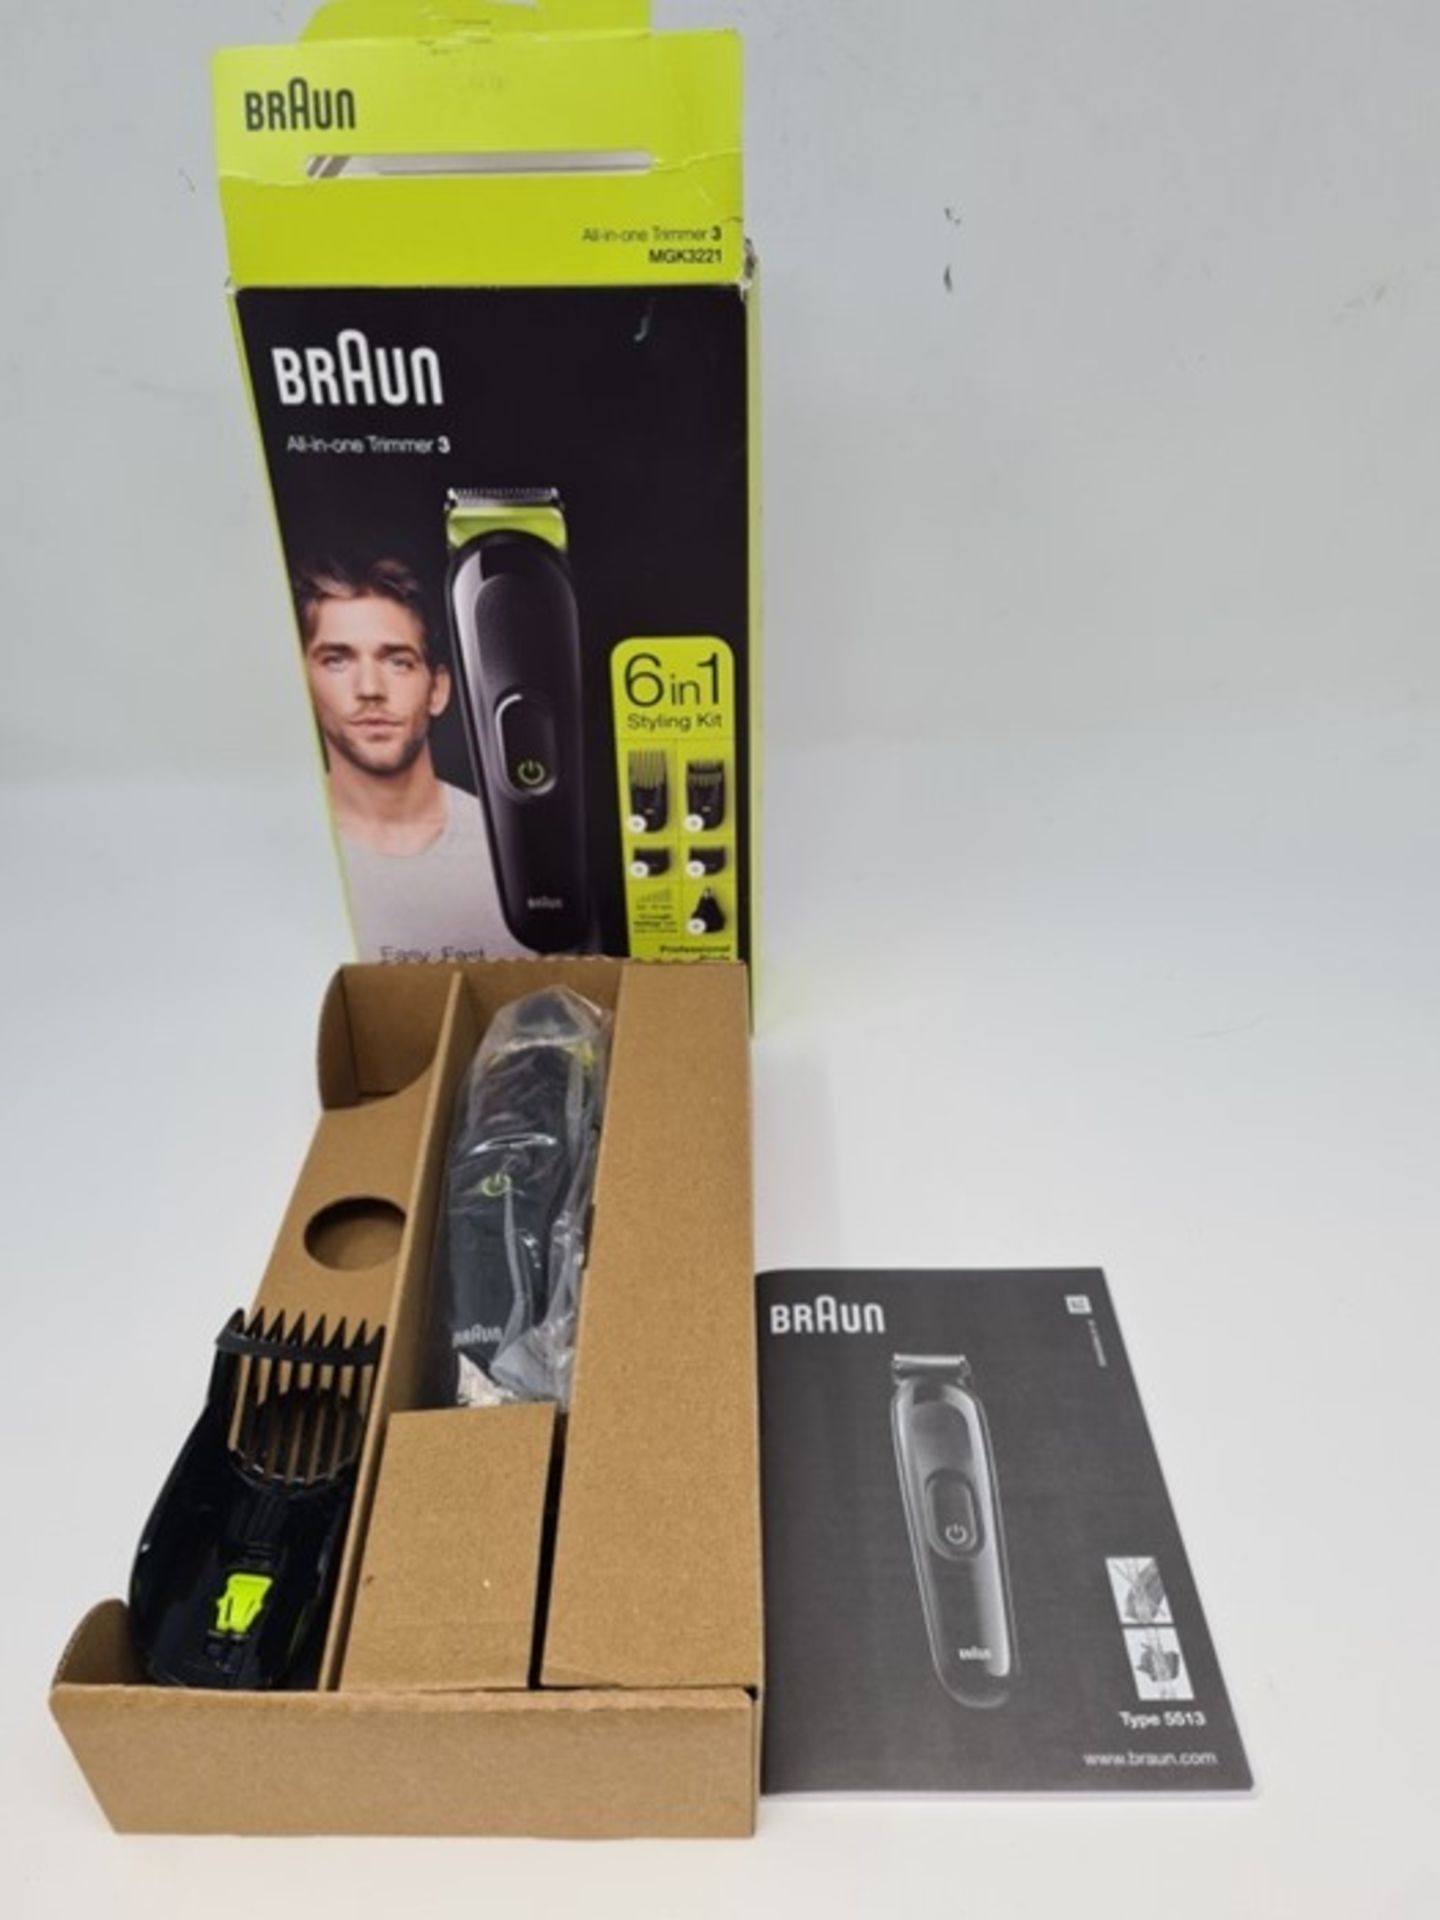 Braun 6-in-1 All-in-one Trimmer 3 MGK3221, Beard Trimmer for Men, Hair Clipper and Fac - Image 2 of 2